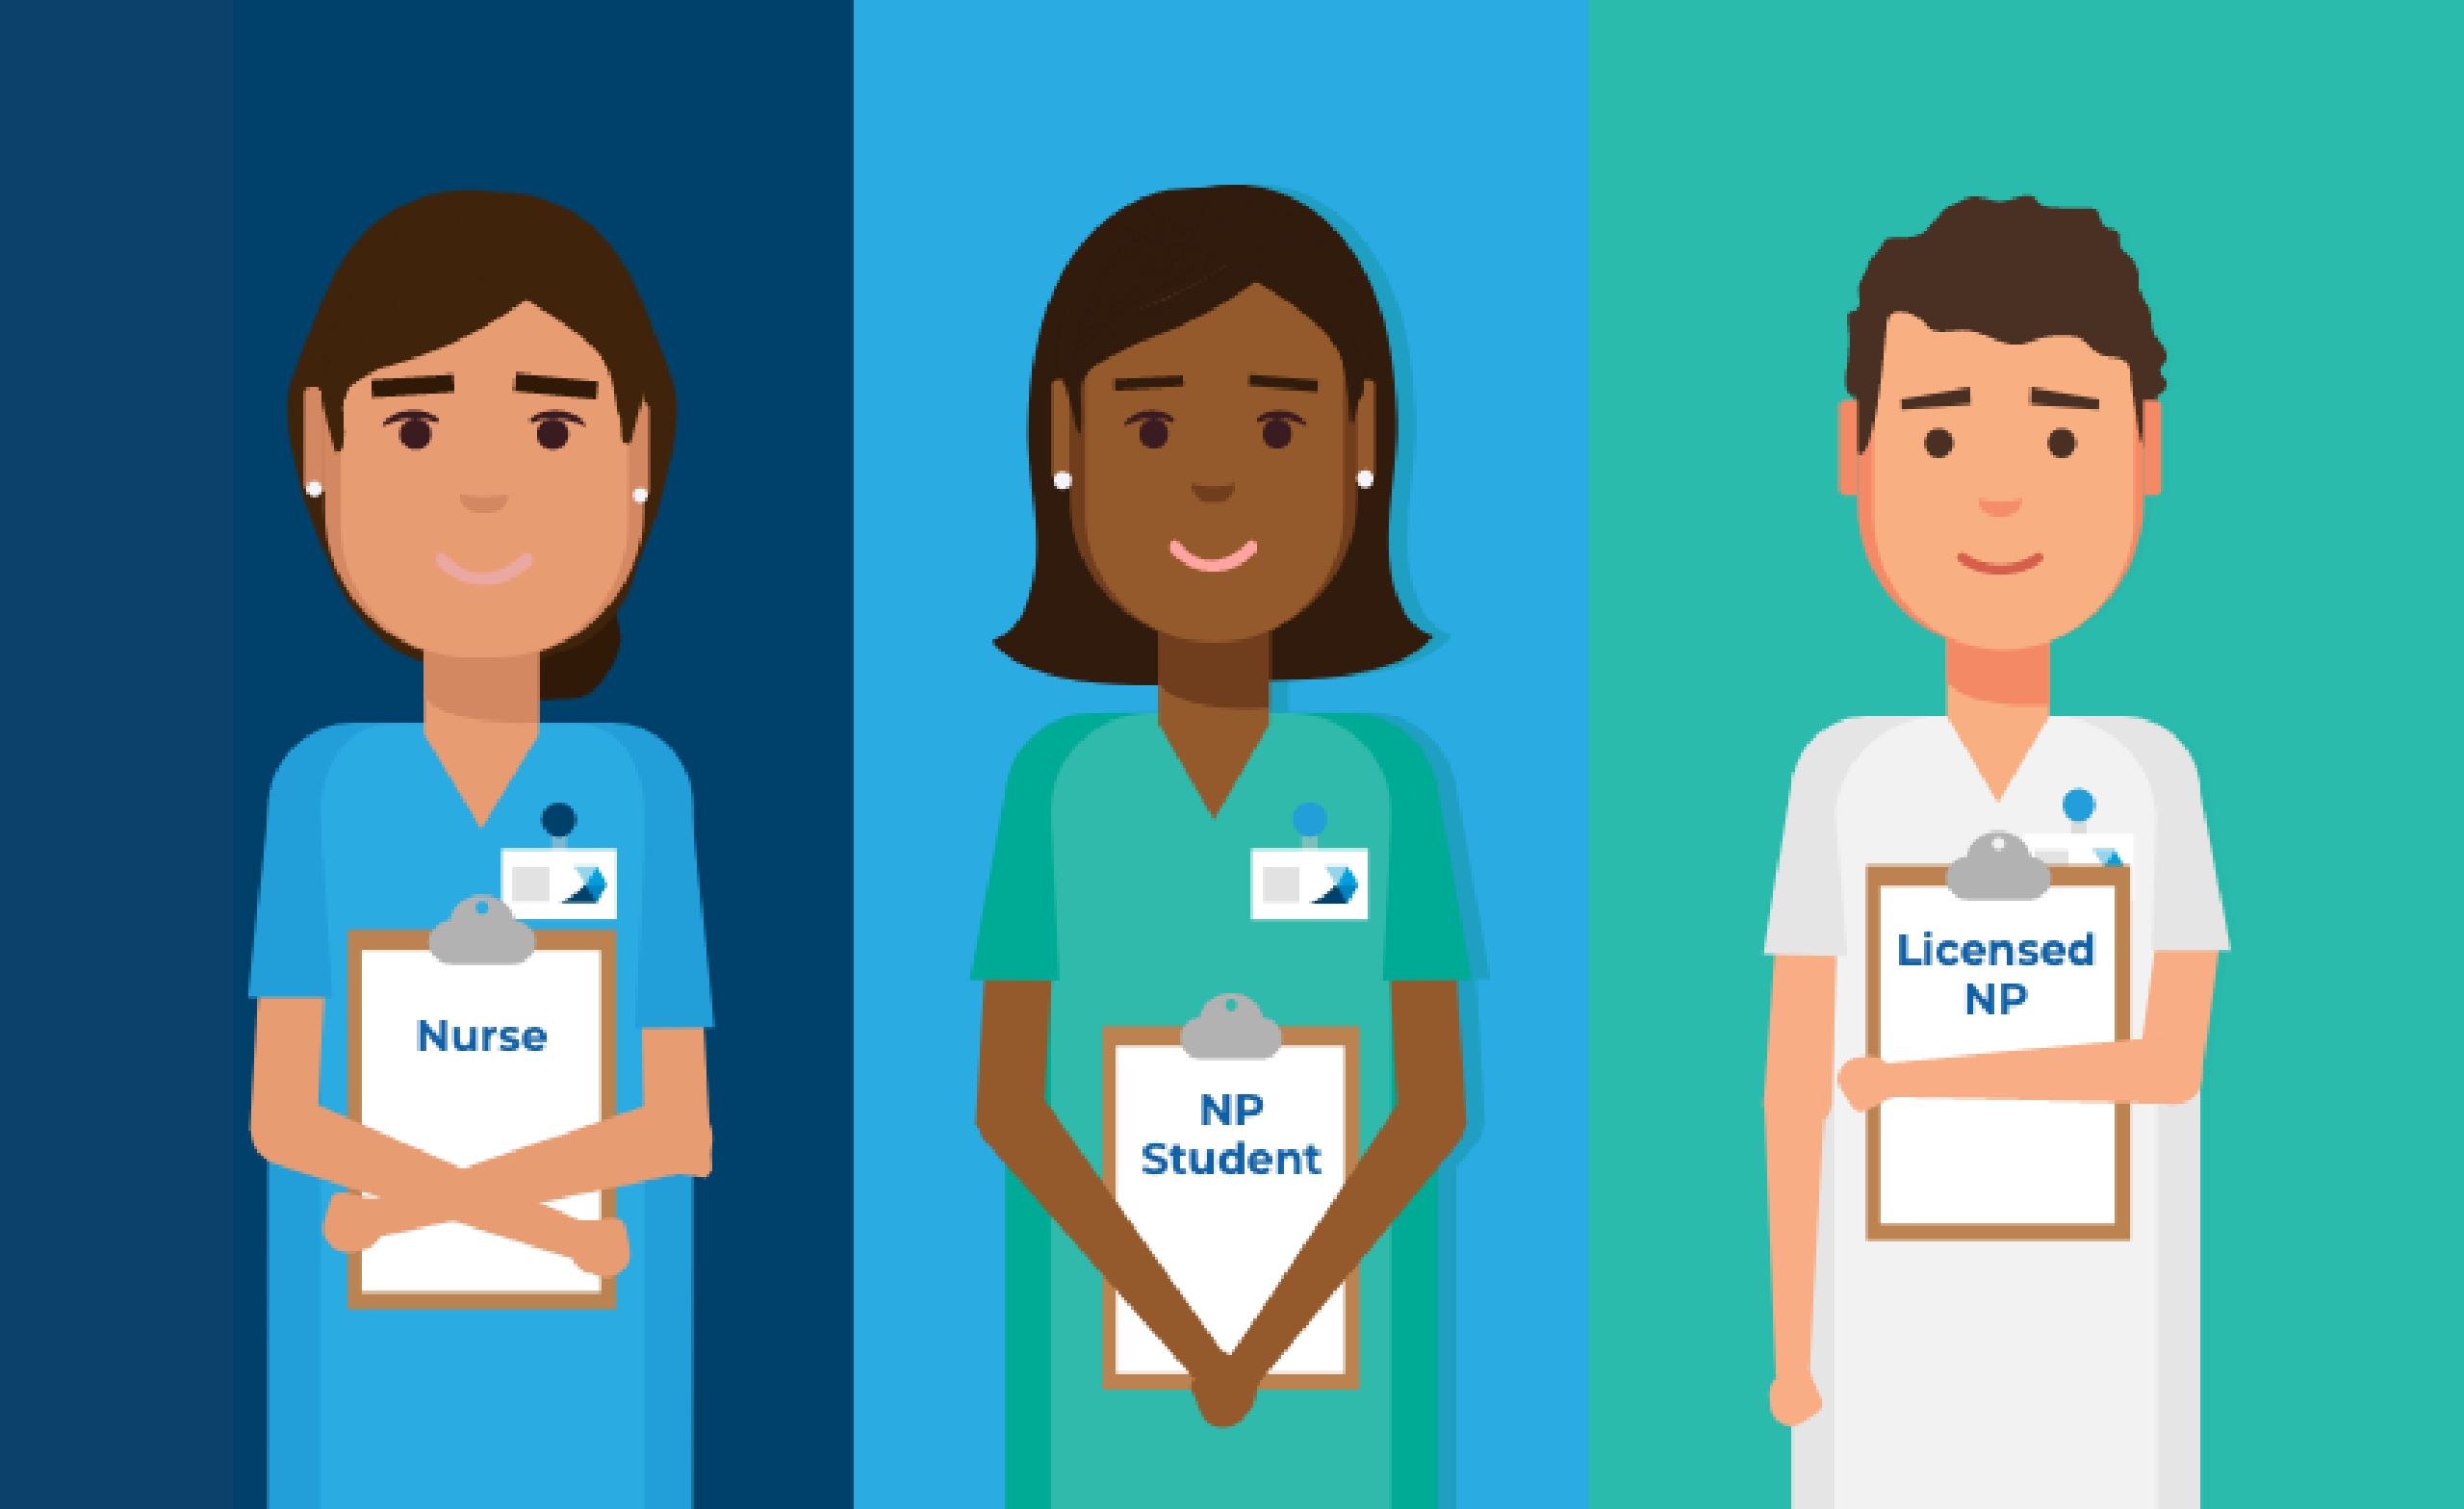 Illustration of an RN, NP student, and a licensed NP